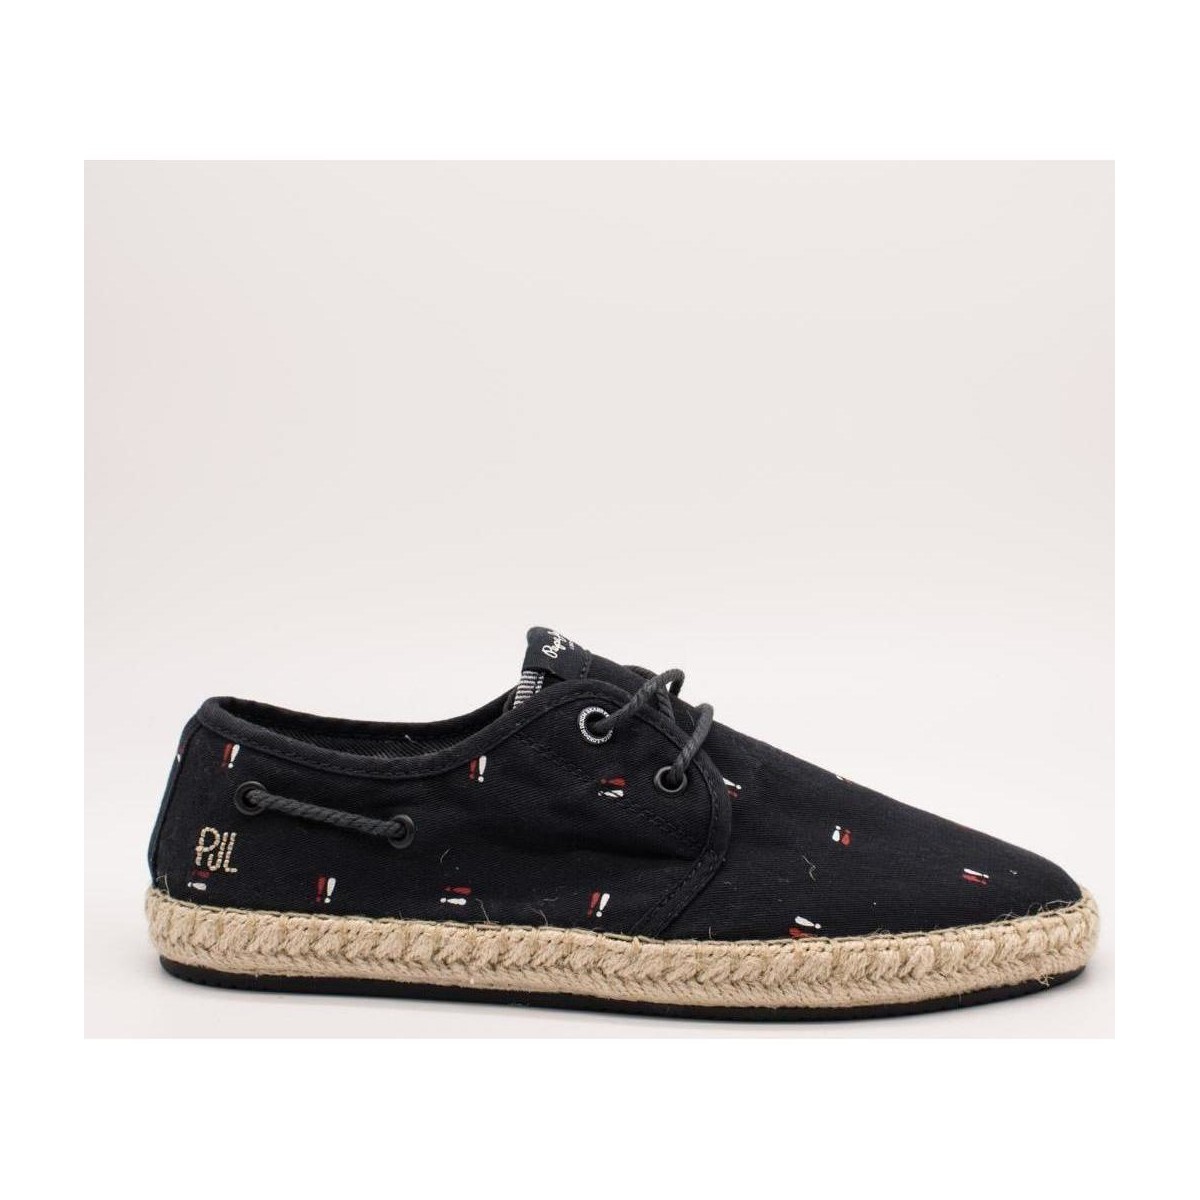 Xαμηλά Sneakers Pepe jeans –